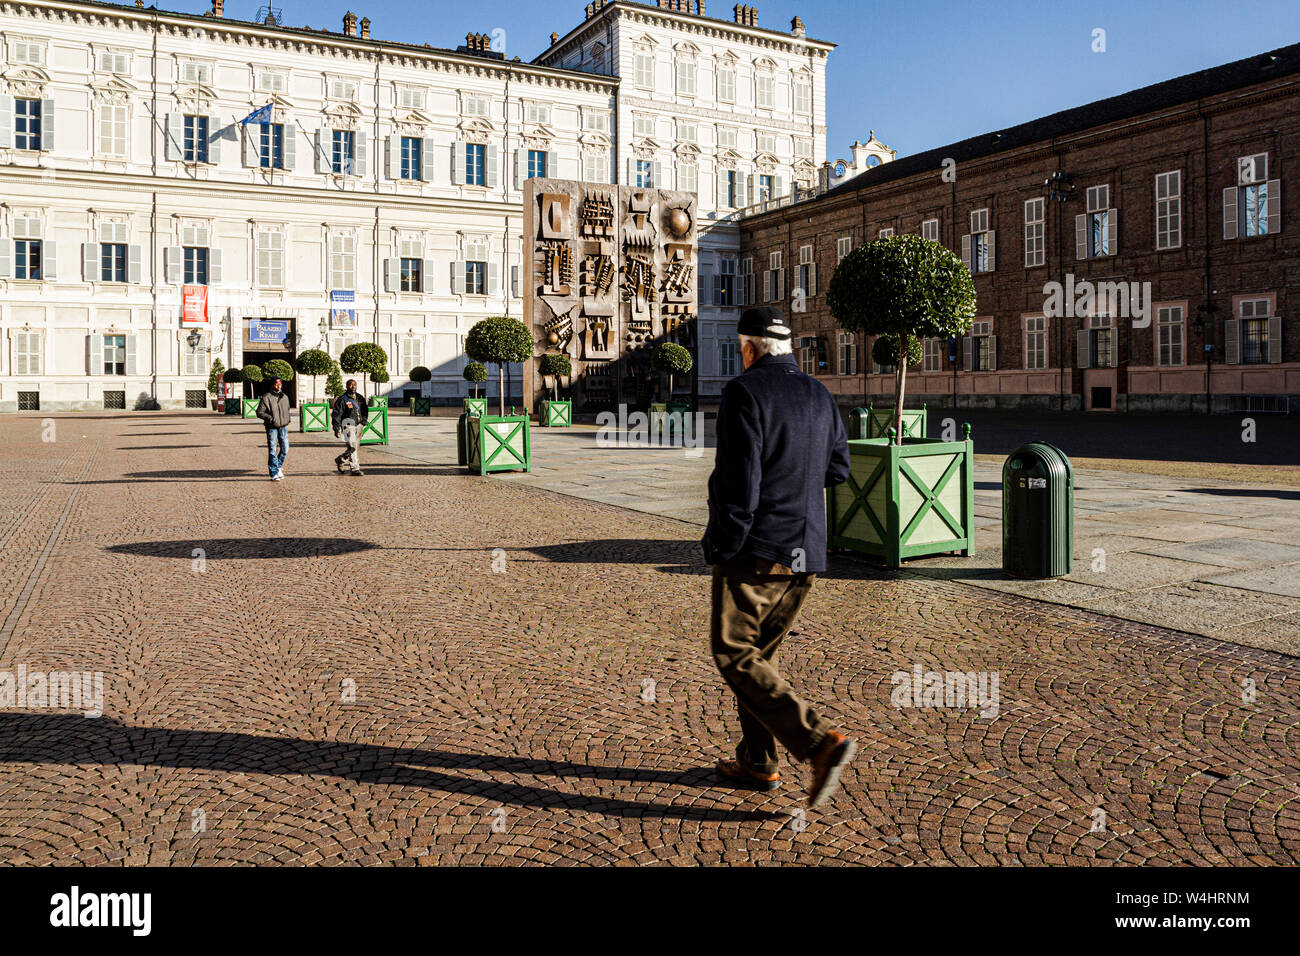 People walking in front of Palazzo Reale (Royal Palace) at Piazza Reale (Royal Square). Turin, Province of Turin, Italy. Stock Photo